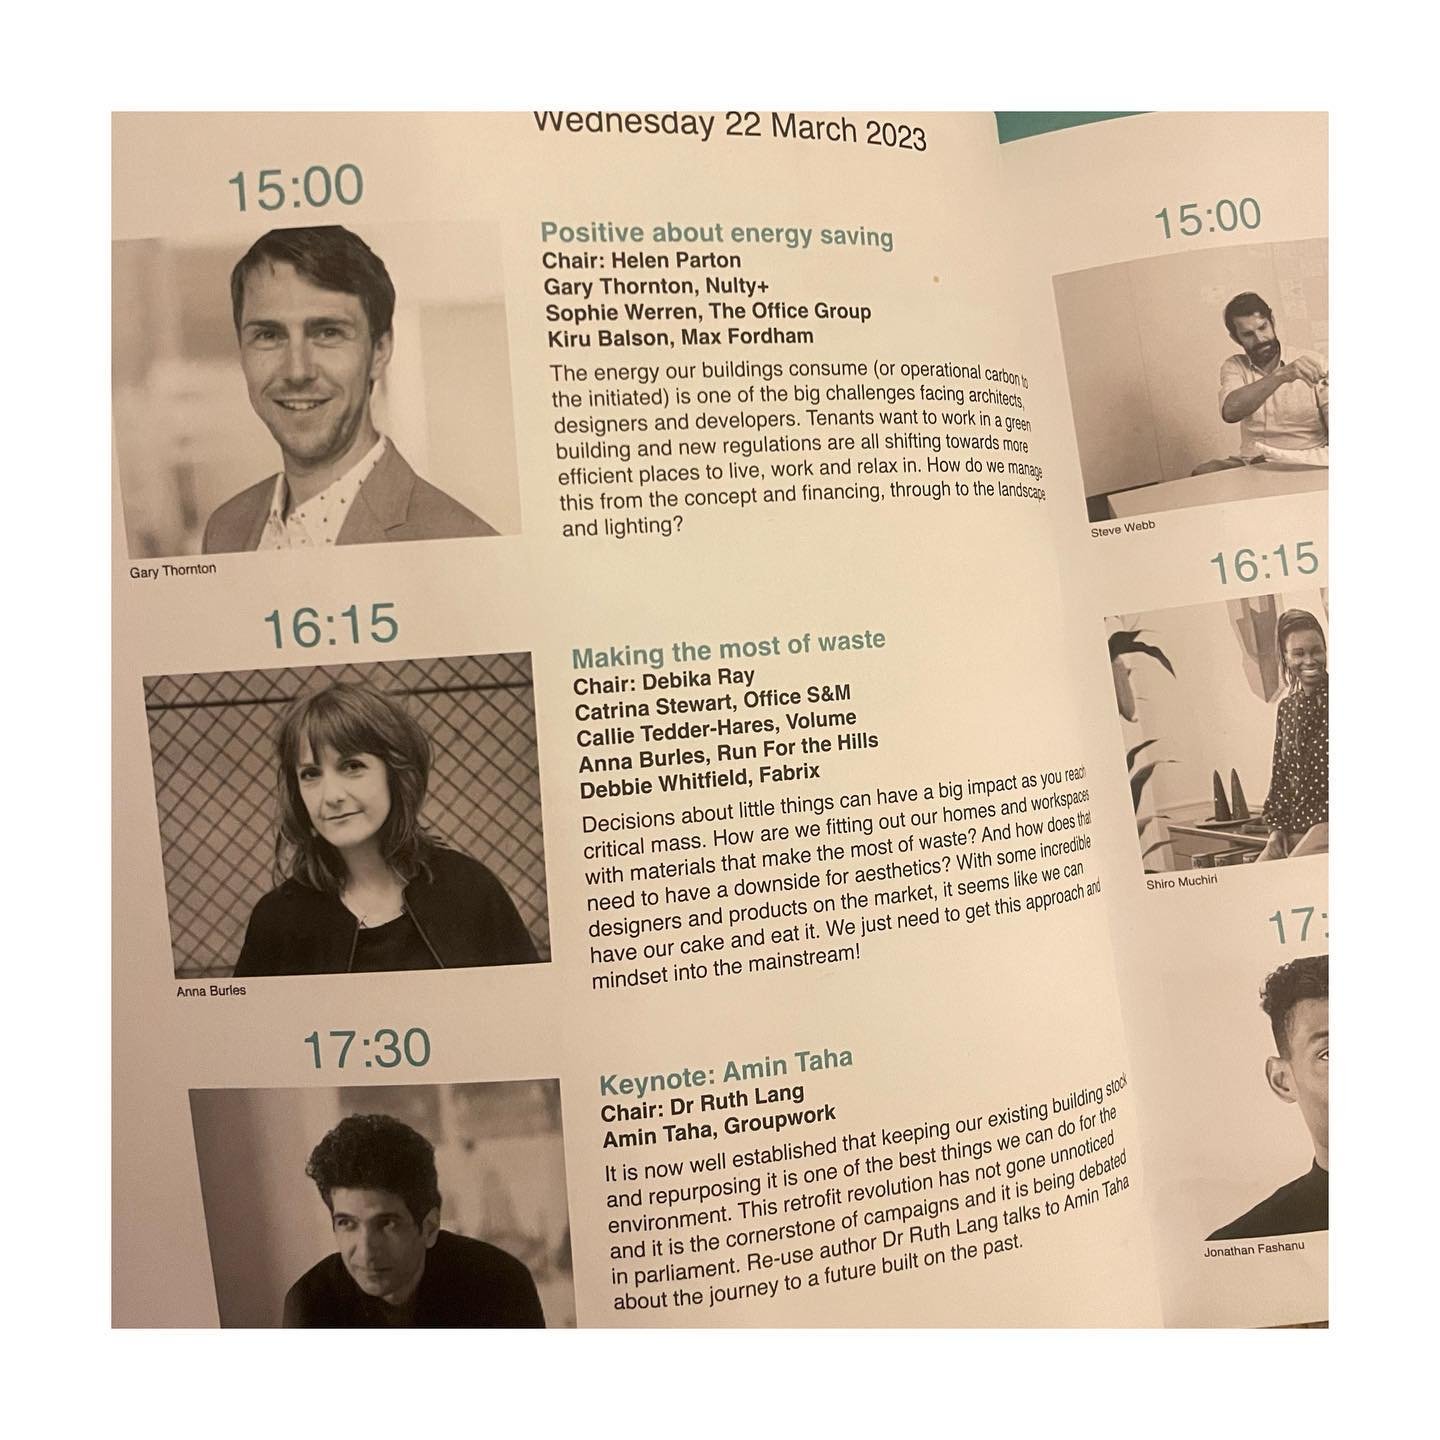 So enjoyed the seminars today at @architect_at_work. I&rsquo;m very tempted to visit again for tomorrow&rsquo;s sessions. Especially good to hear #amintahaarchitects speak about The Ethics of Architecture ⚡️ and a joy to catch up/ meet and share the 